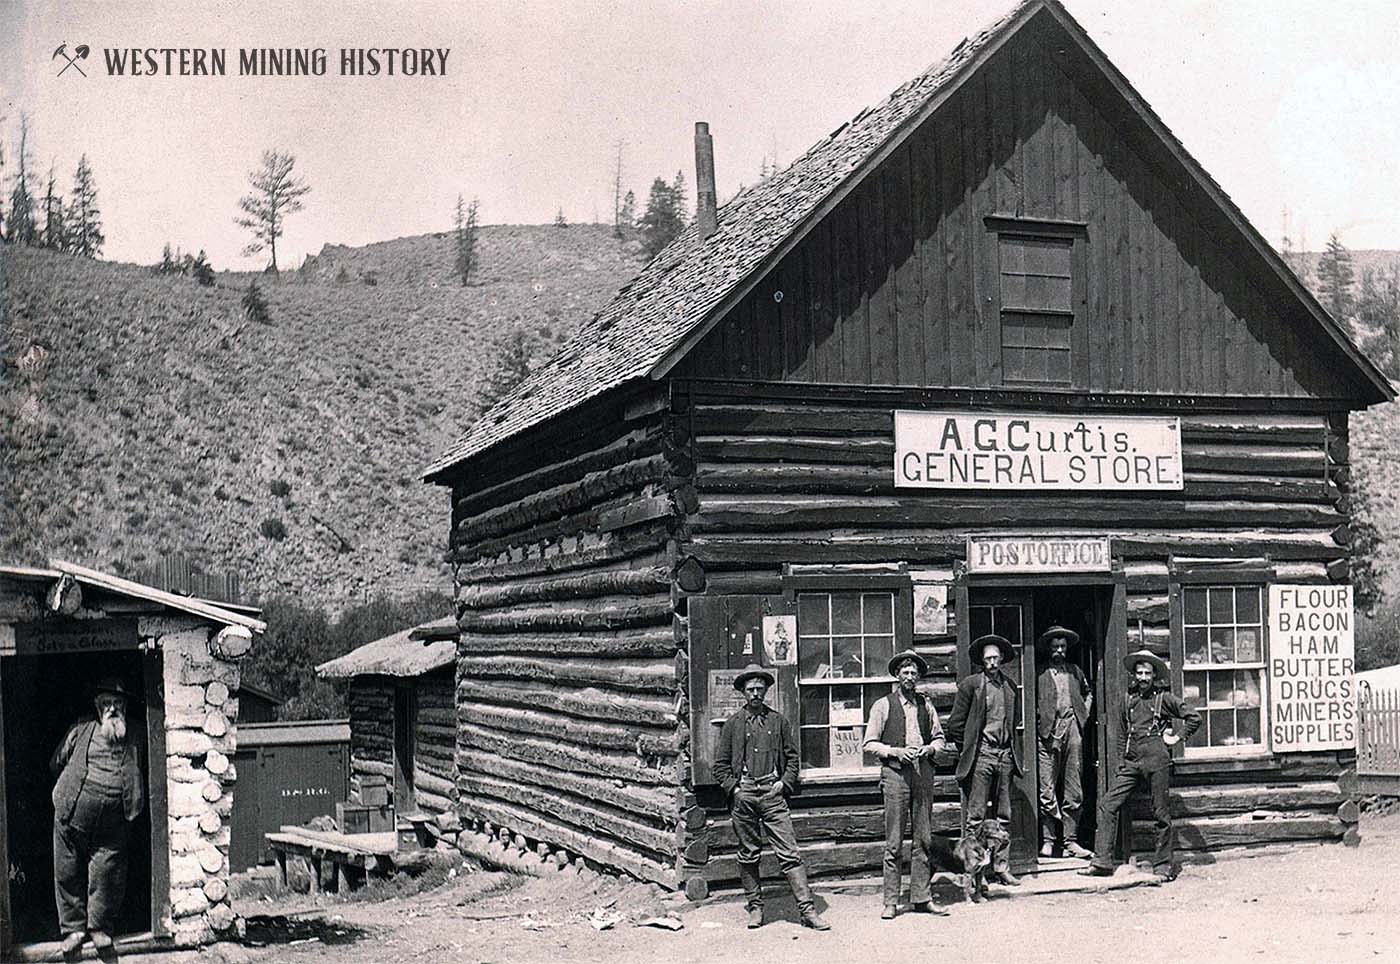 A.G. Curtis General Store & Post Office ca. 1880-1890